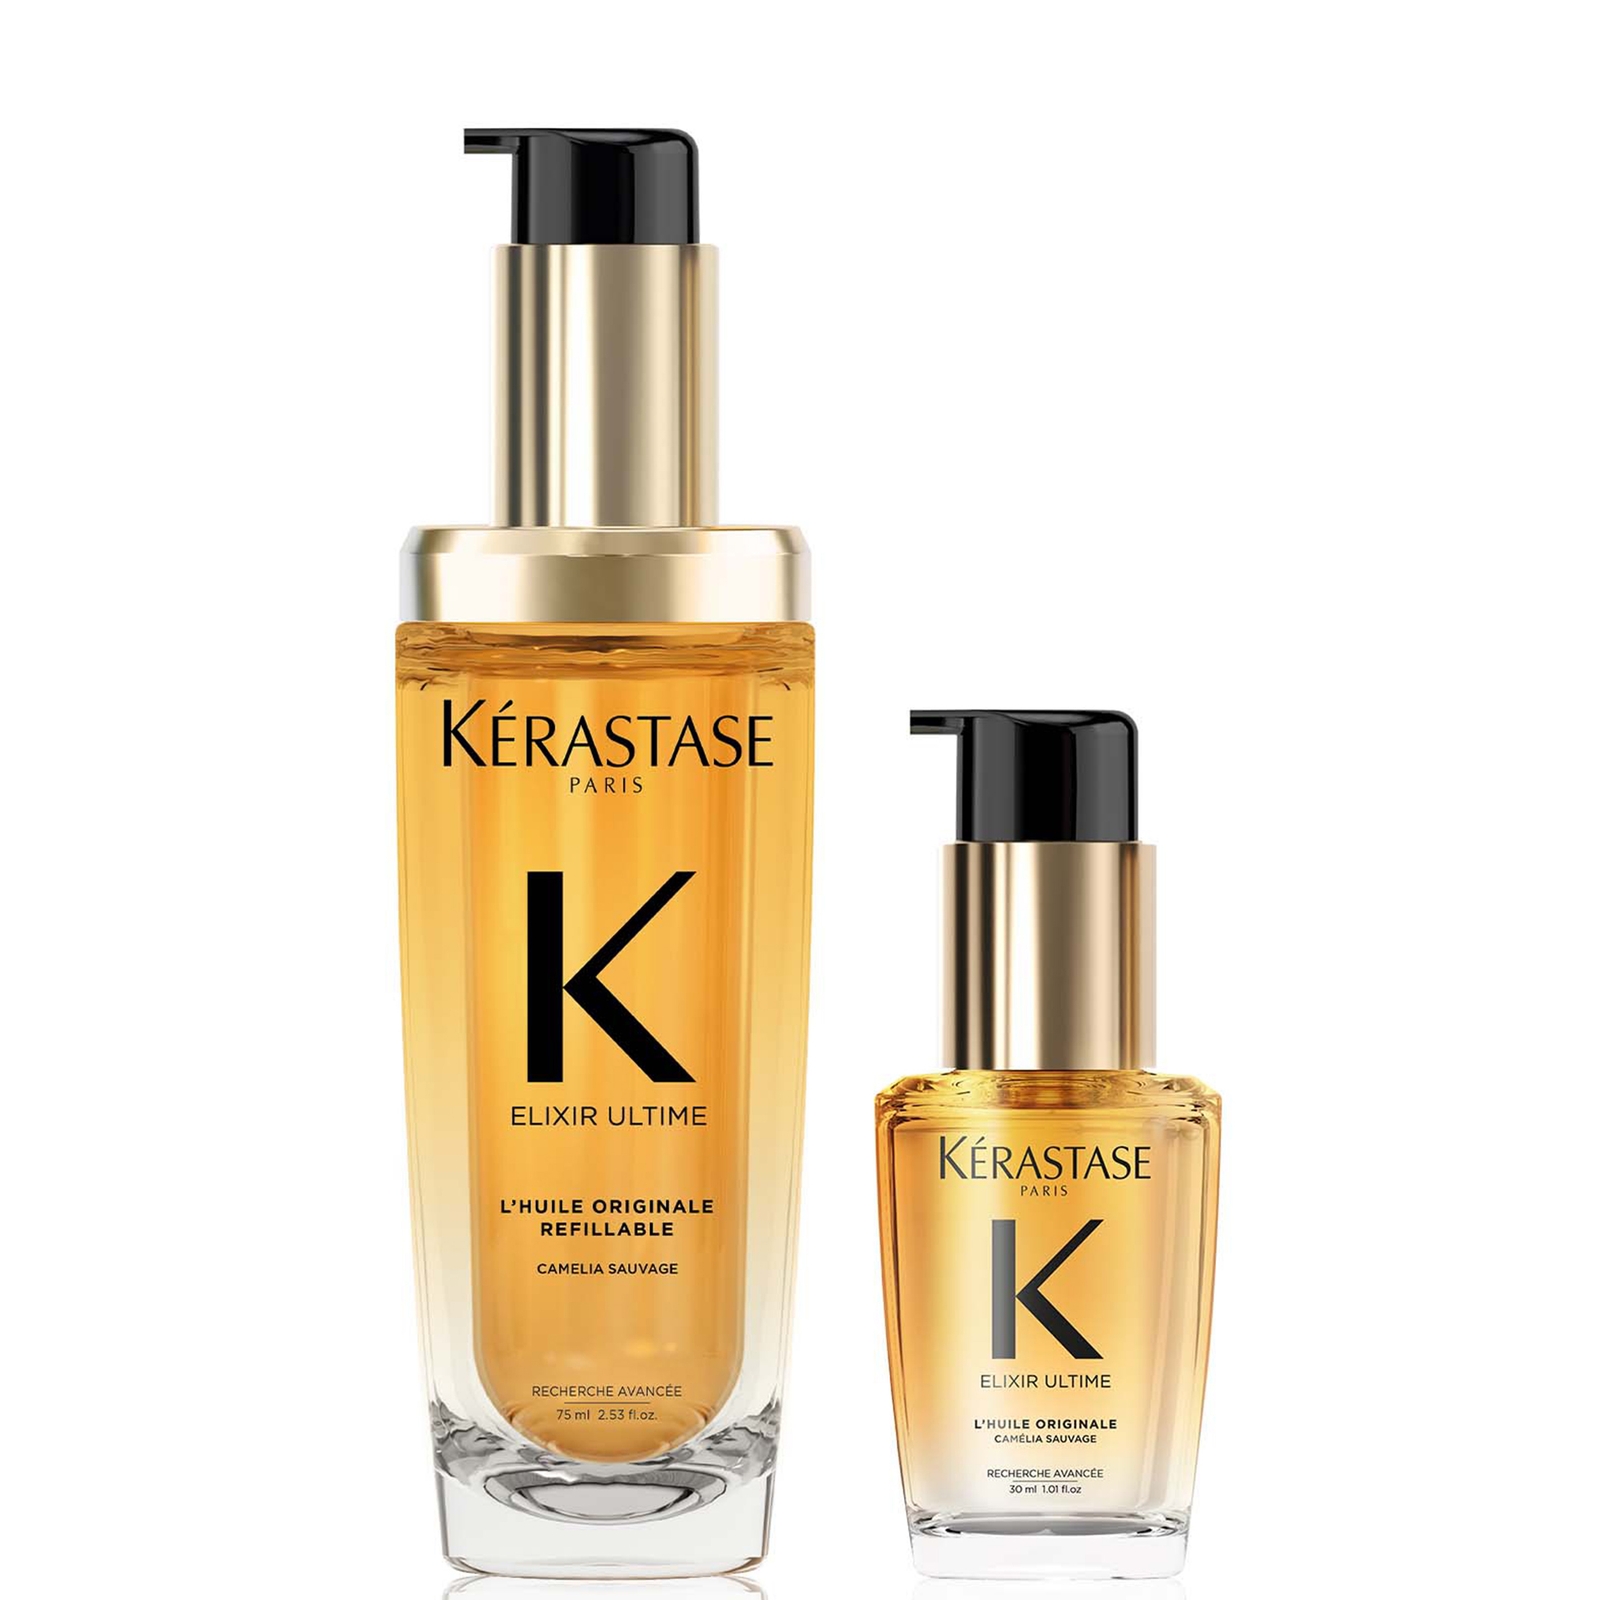 Image of Kérastase Elixir Ultime L'Huile Originale Hair Oil 75ml and Elixir Ultime Hair Oil 30ml Travel Size Duo for All Hair Types